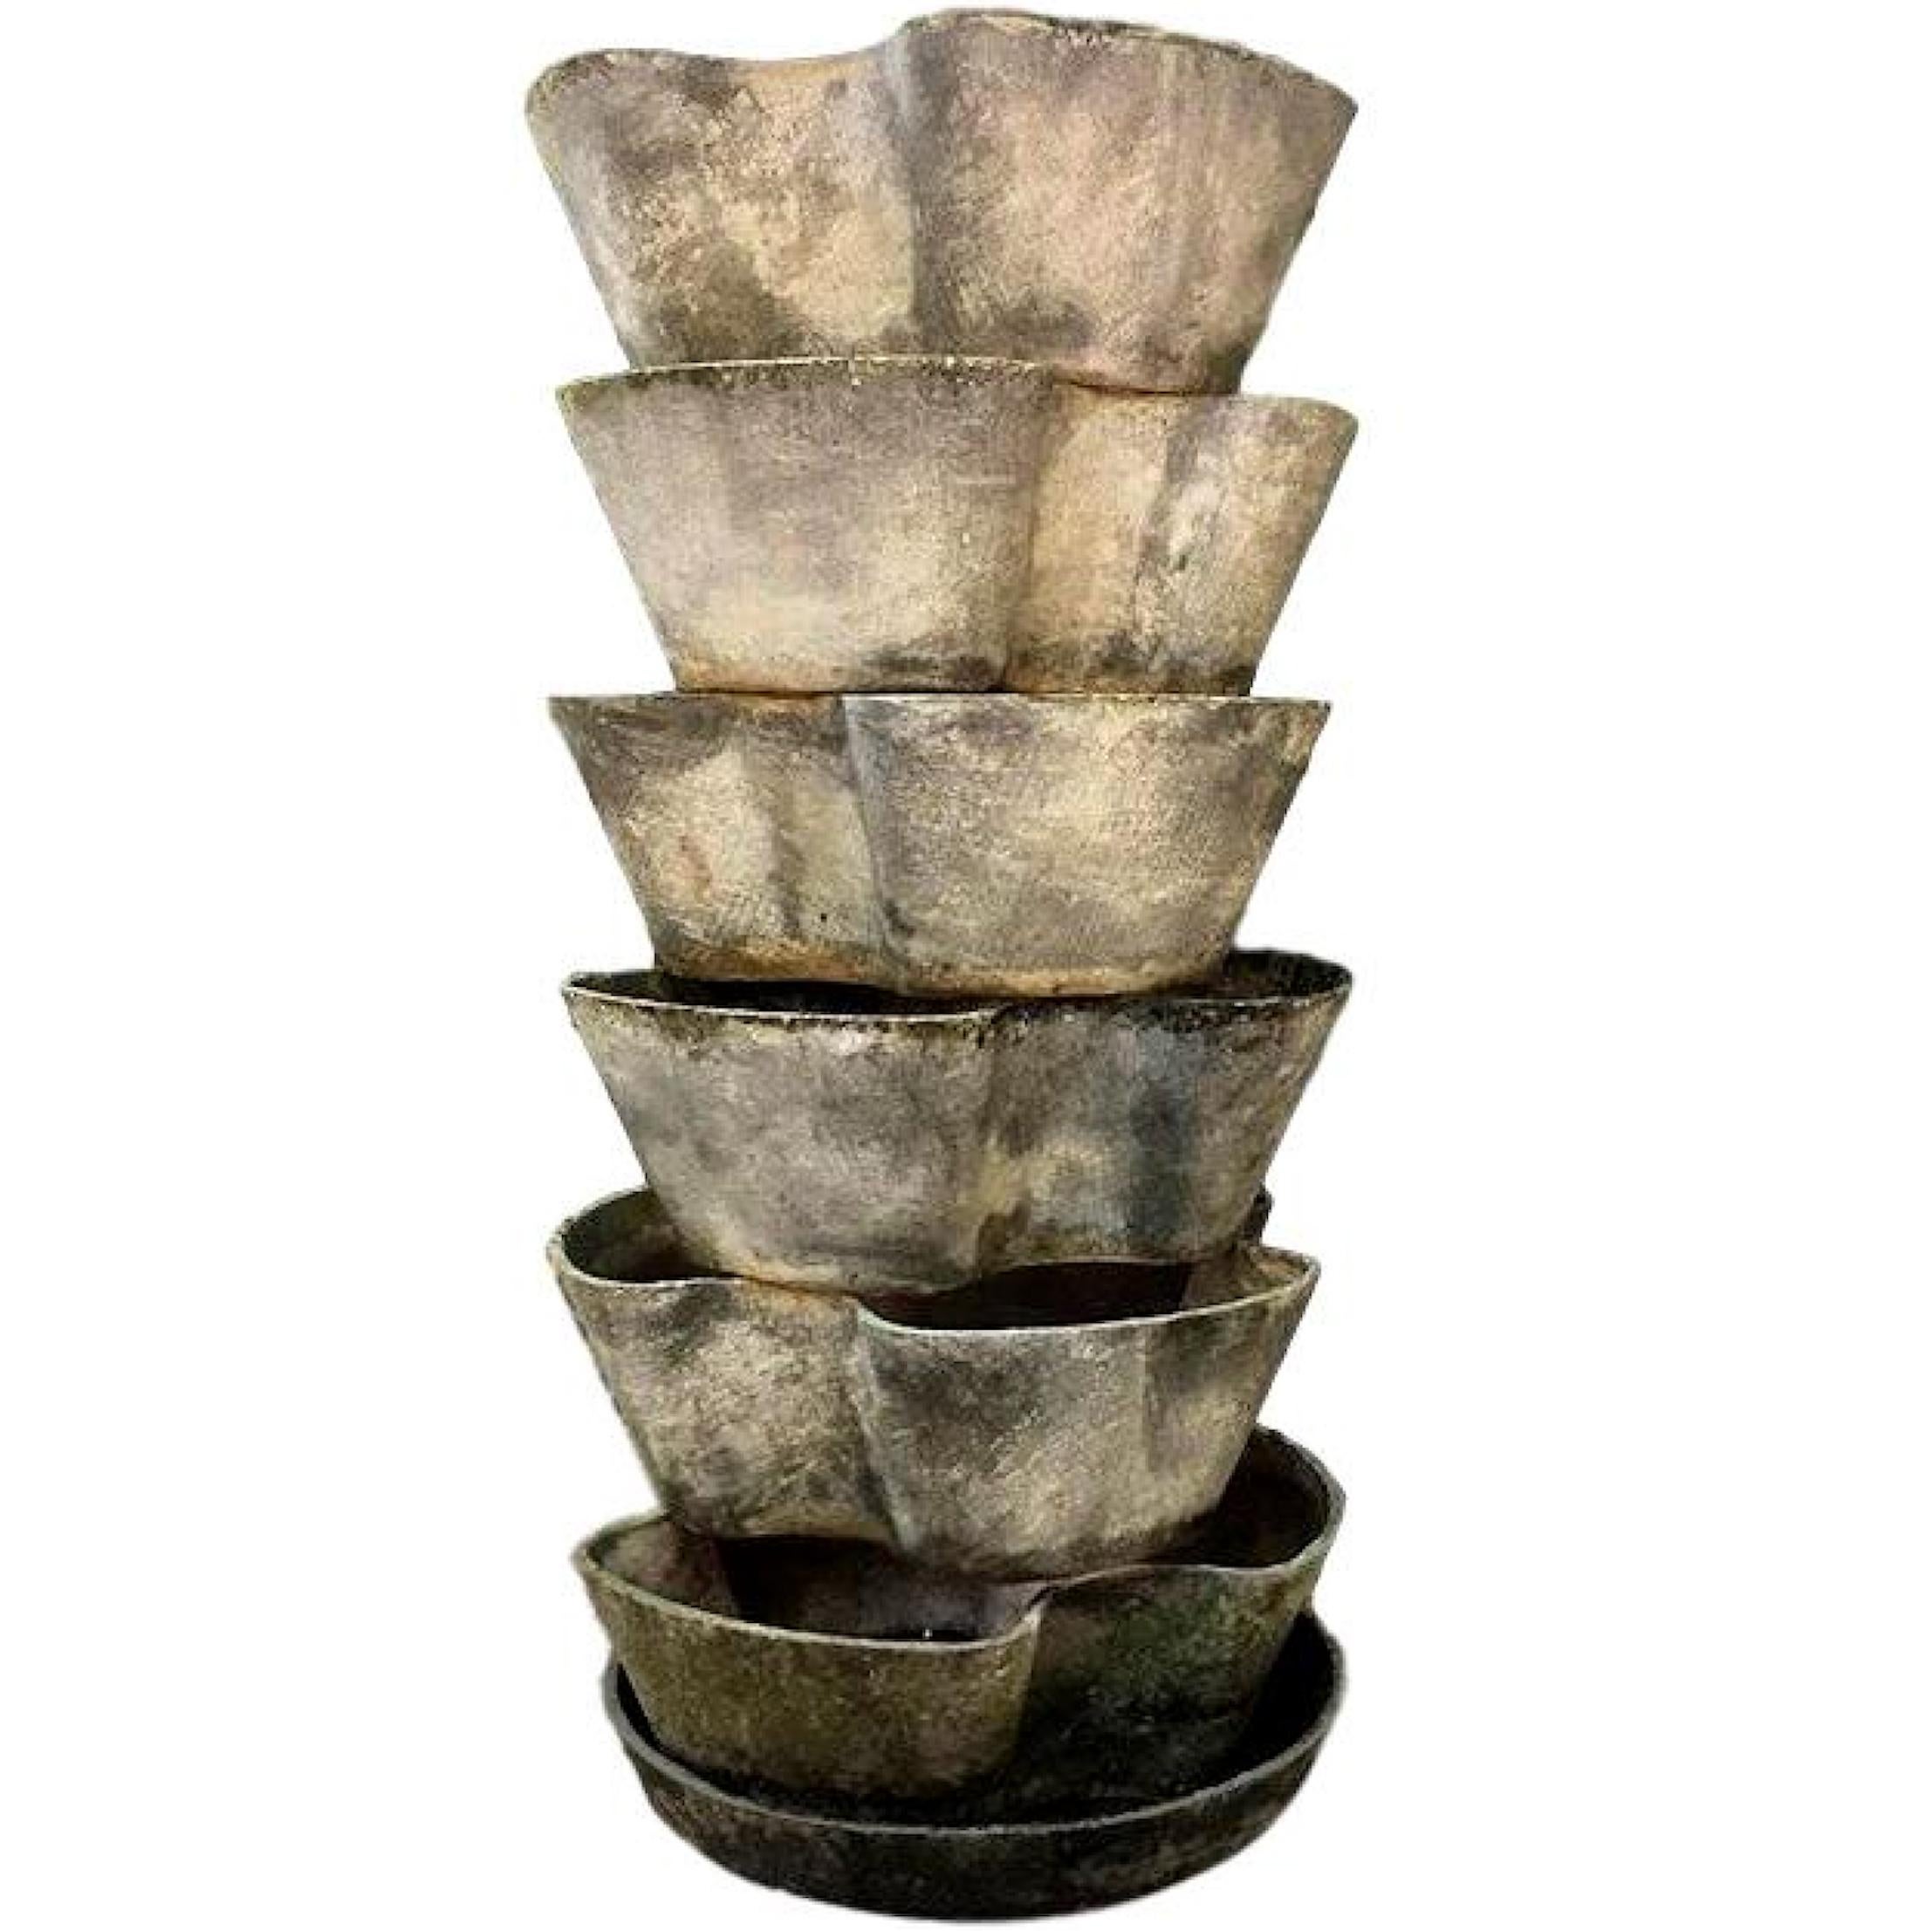 Very rare set of Willy Guhl sculptural flower planters made of cement. Great sculptural objects. Hollow and open on both ends. Perfect for placing in soil and arranging plants/flowers inside. Excellent vintage condition with different patinas. 3